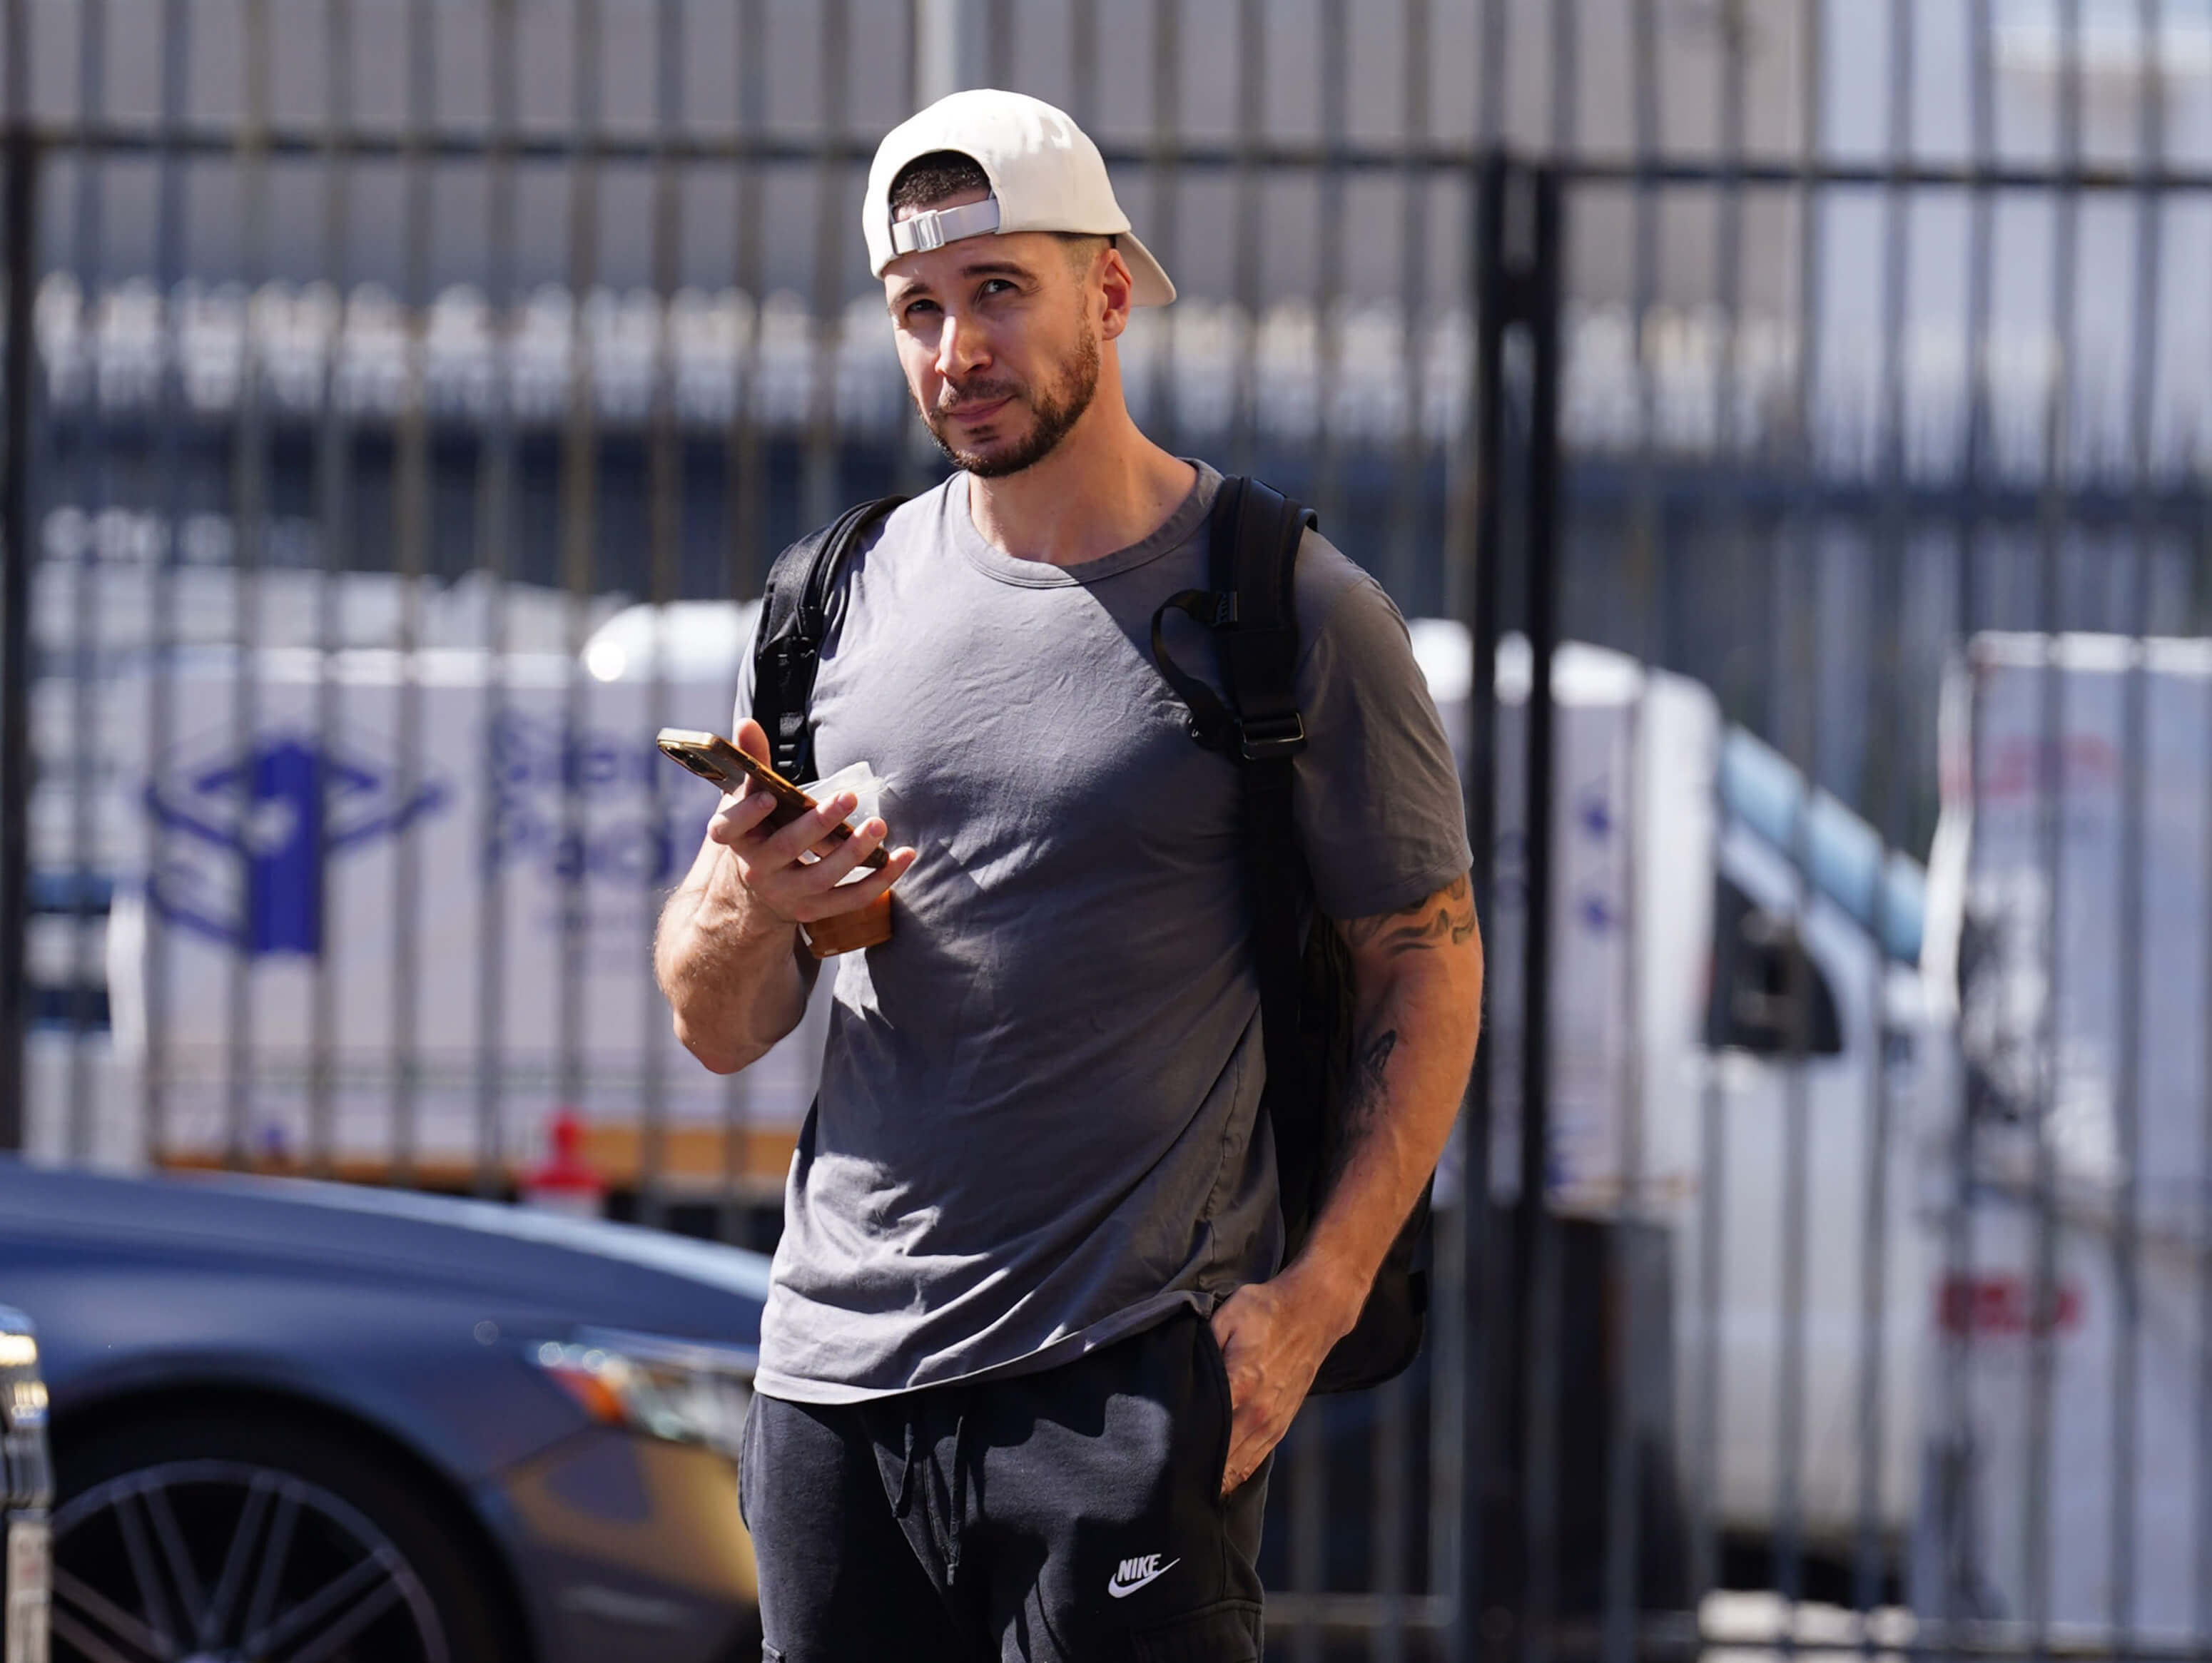 'Jersey Shore: Family Vacation' star Vinny Guadagnino sighted wearing a backwards hat and backpack while holding his phone